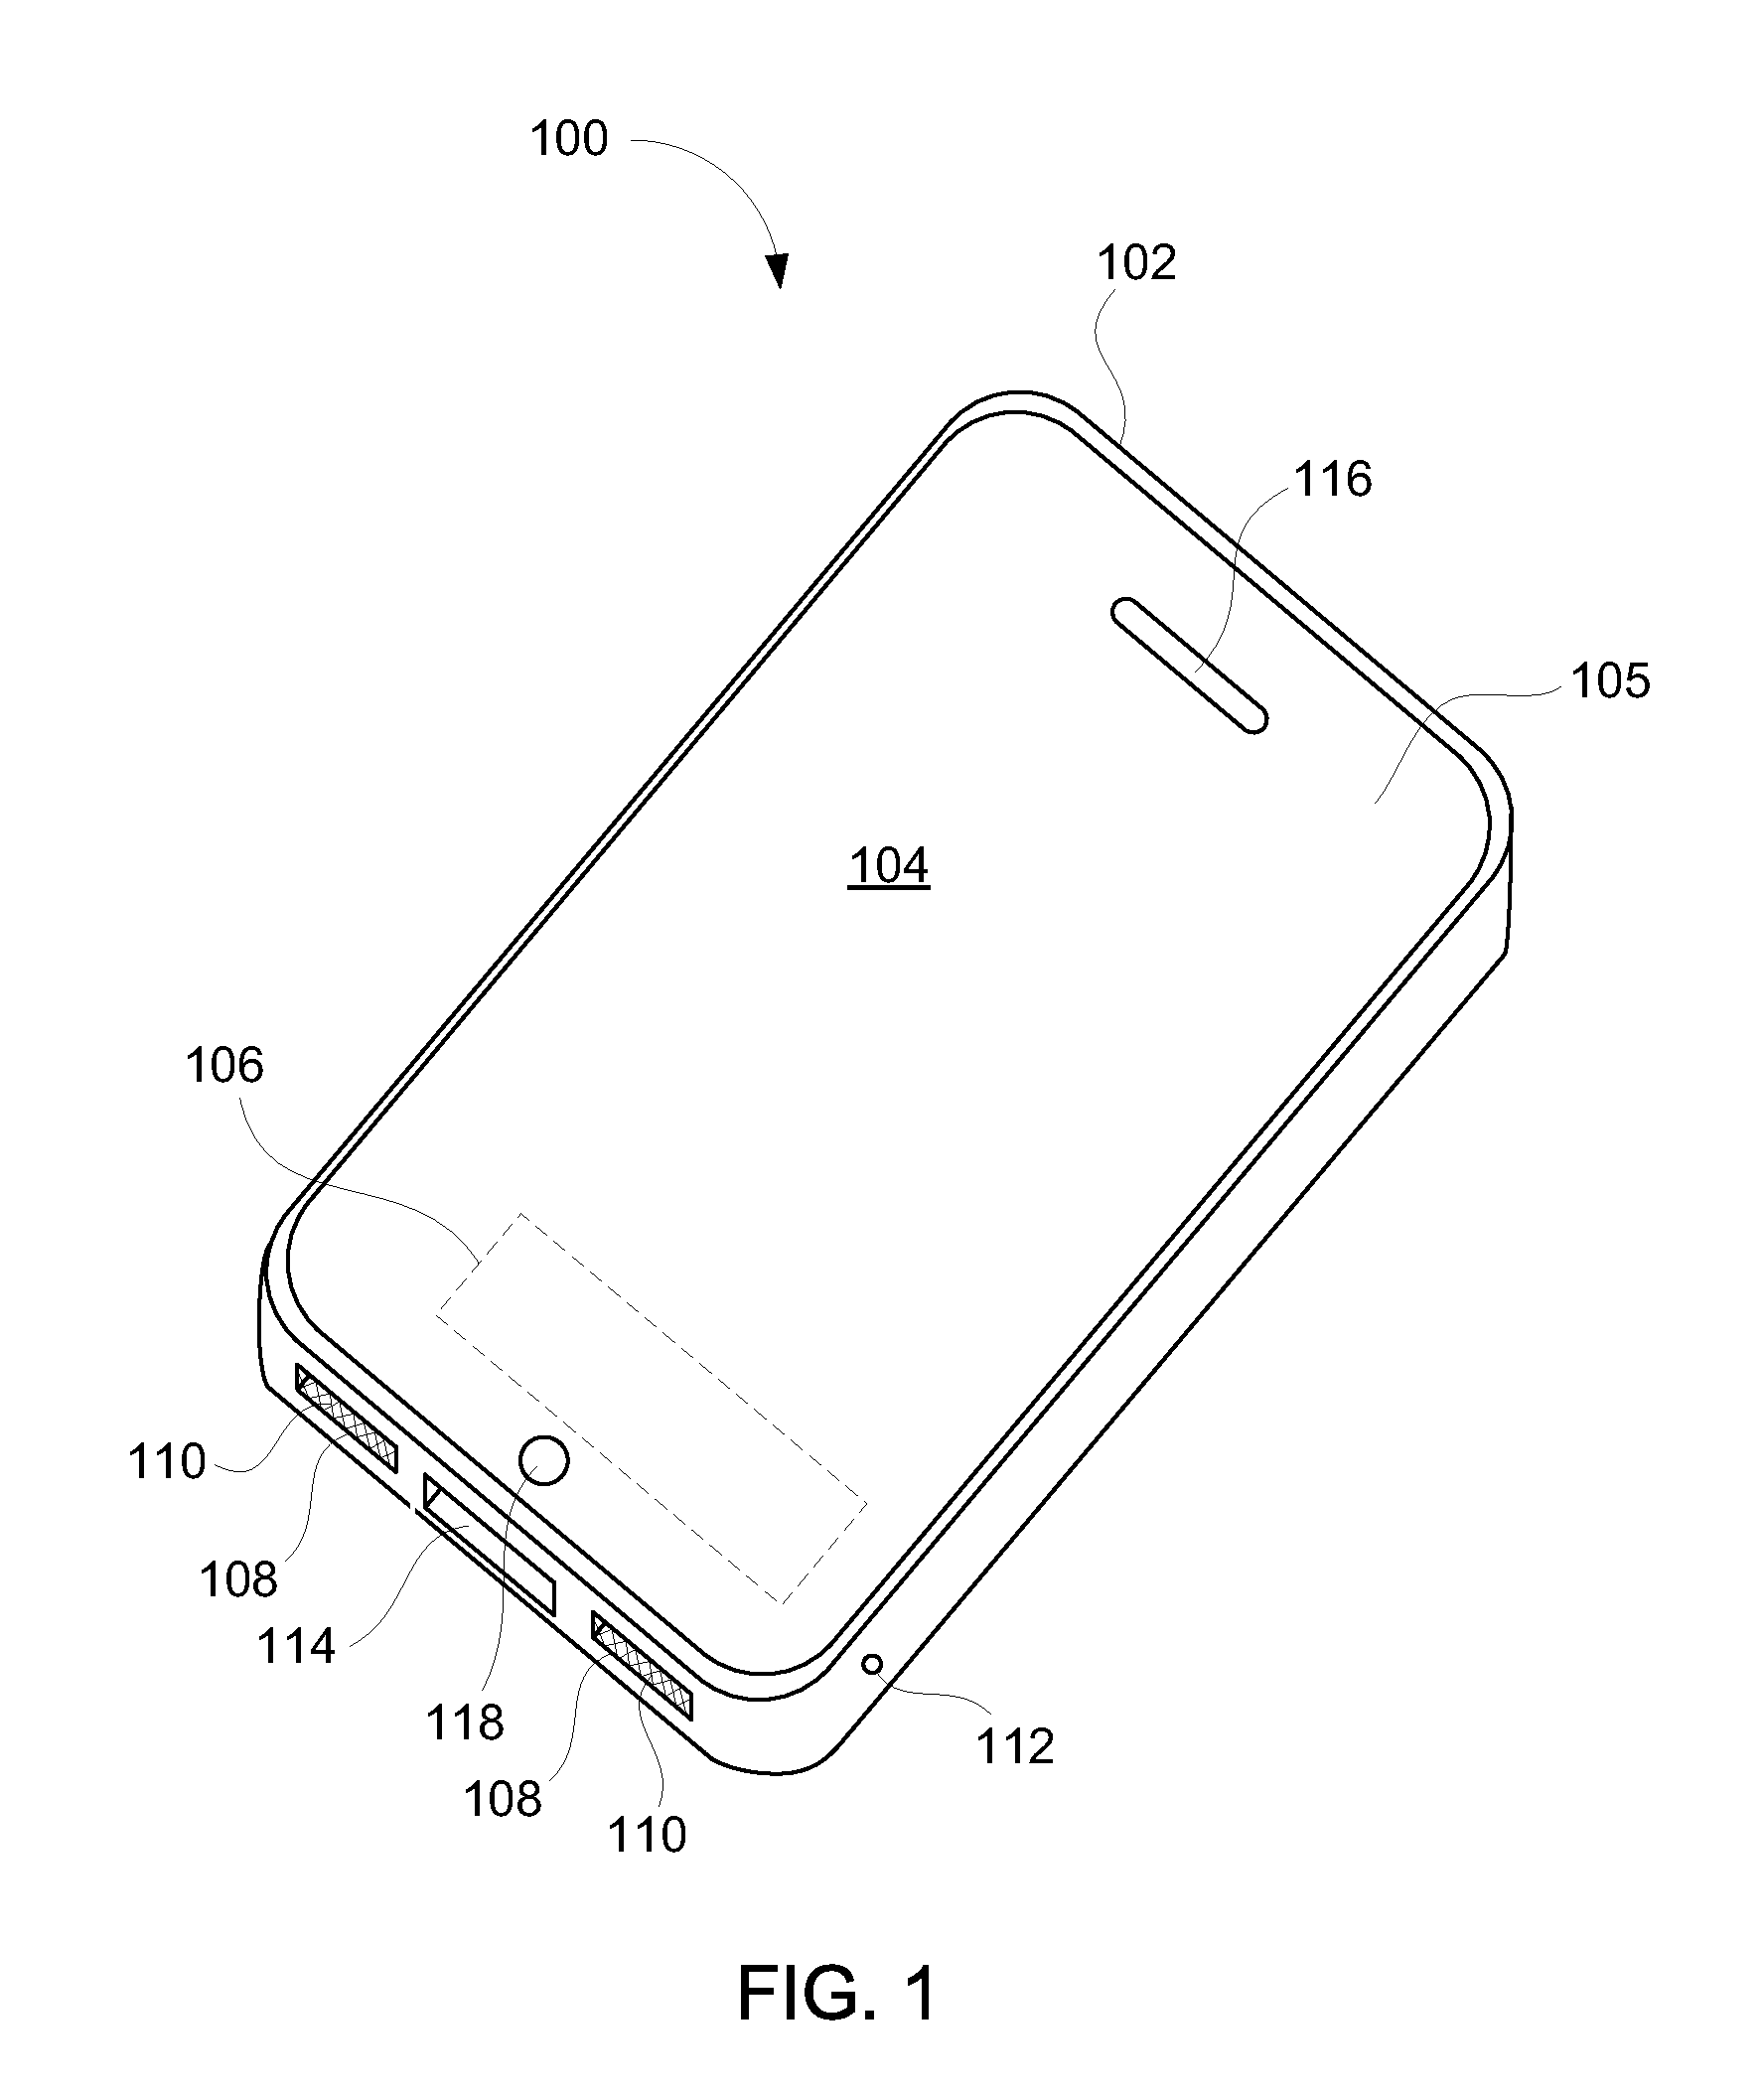 Audio port configuration for compact electronic devices